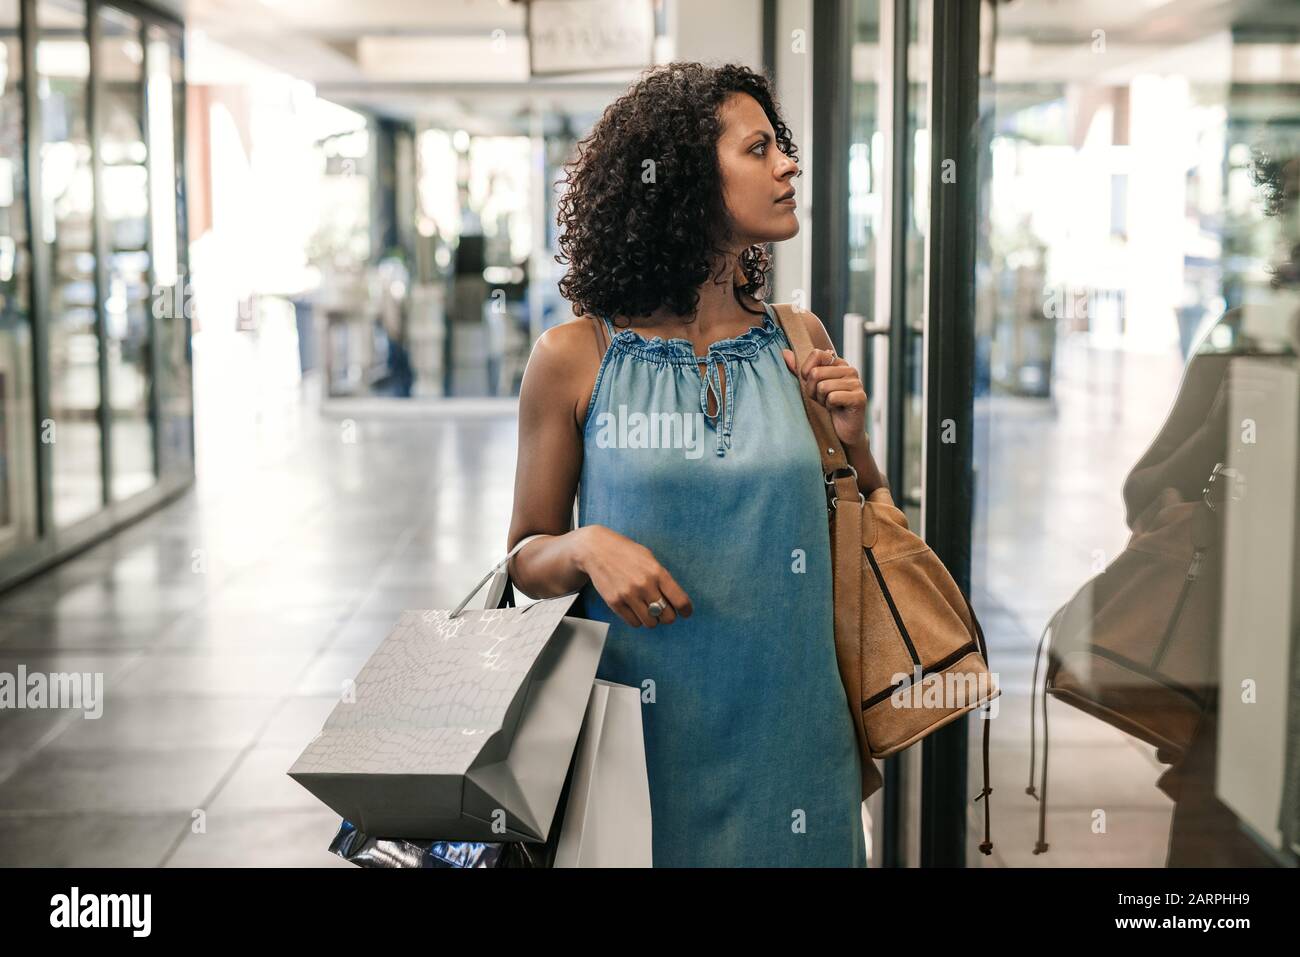 Young woman carrying bags and window shopping in a mall Stock Photo